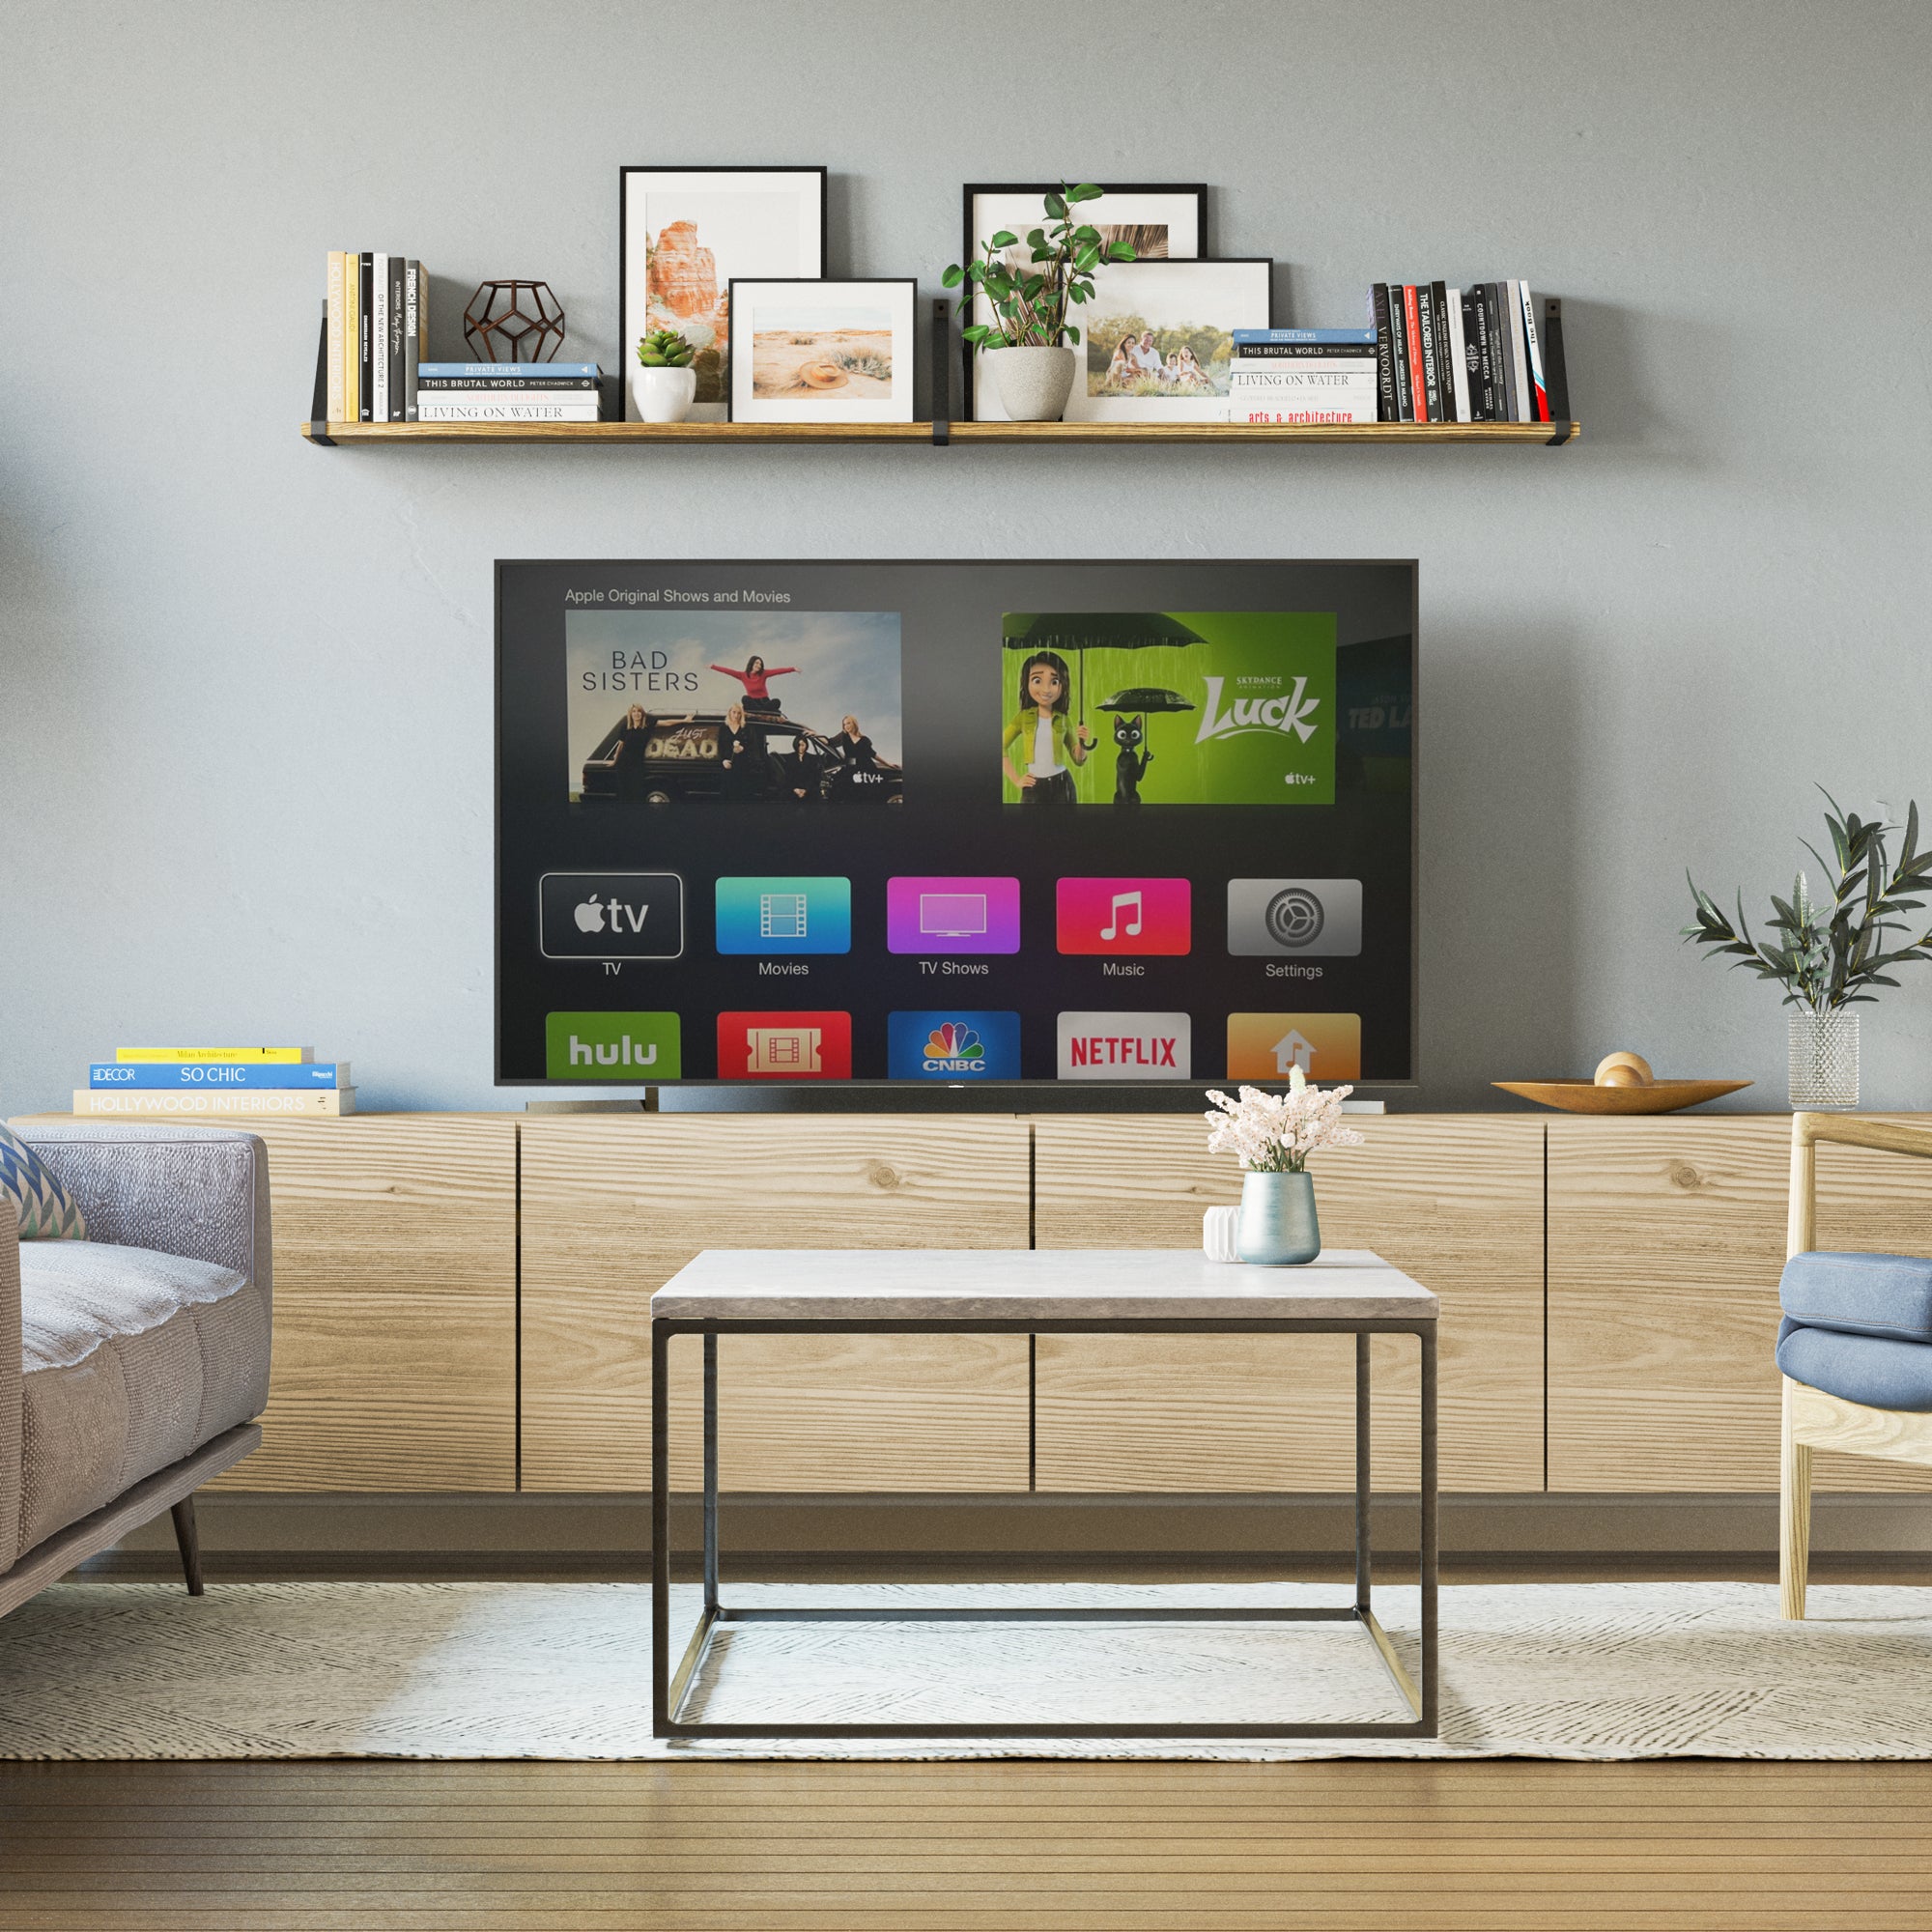 A modern living room with a flat-screen TV displaying a streaming service interface on a gray wall. Above the TV, there is a long shelf with books, framed pictures, and plants. Below the TV, a wooden media console stretches across, with a small coffee table and decorative items in the foreground.